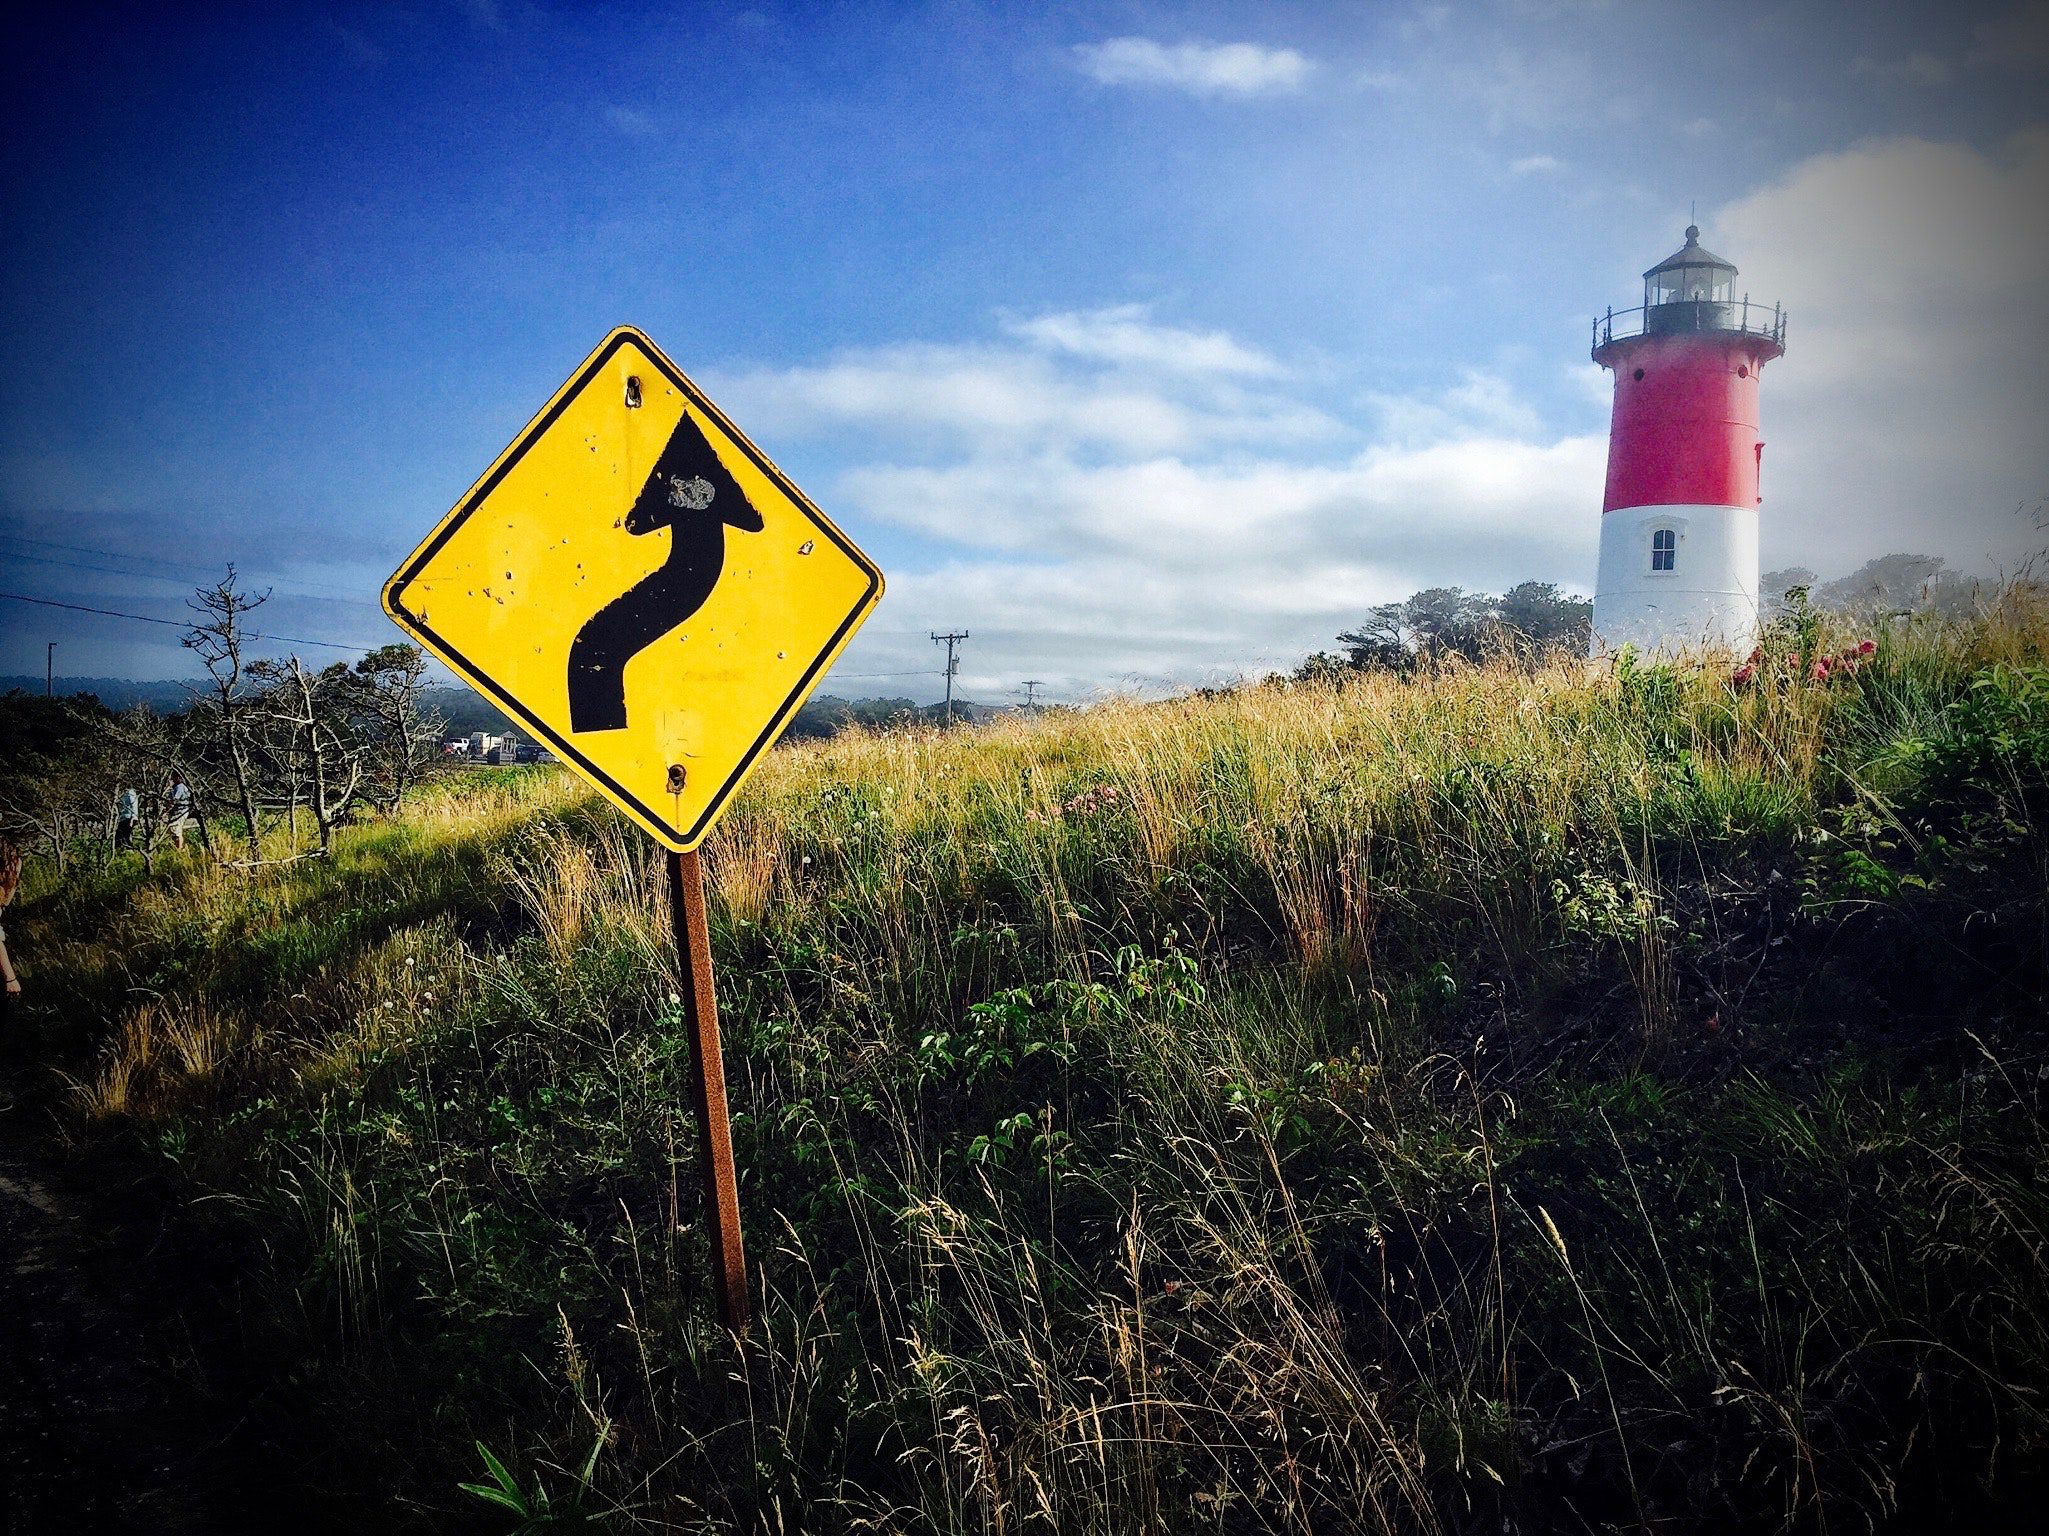 a caution sign in an uphill with lighthouse on top, like Hoffman Realty warning to be careful